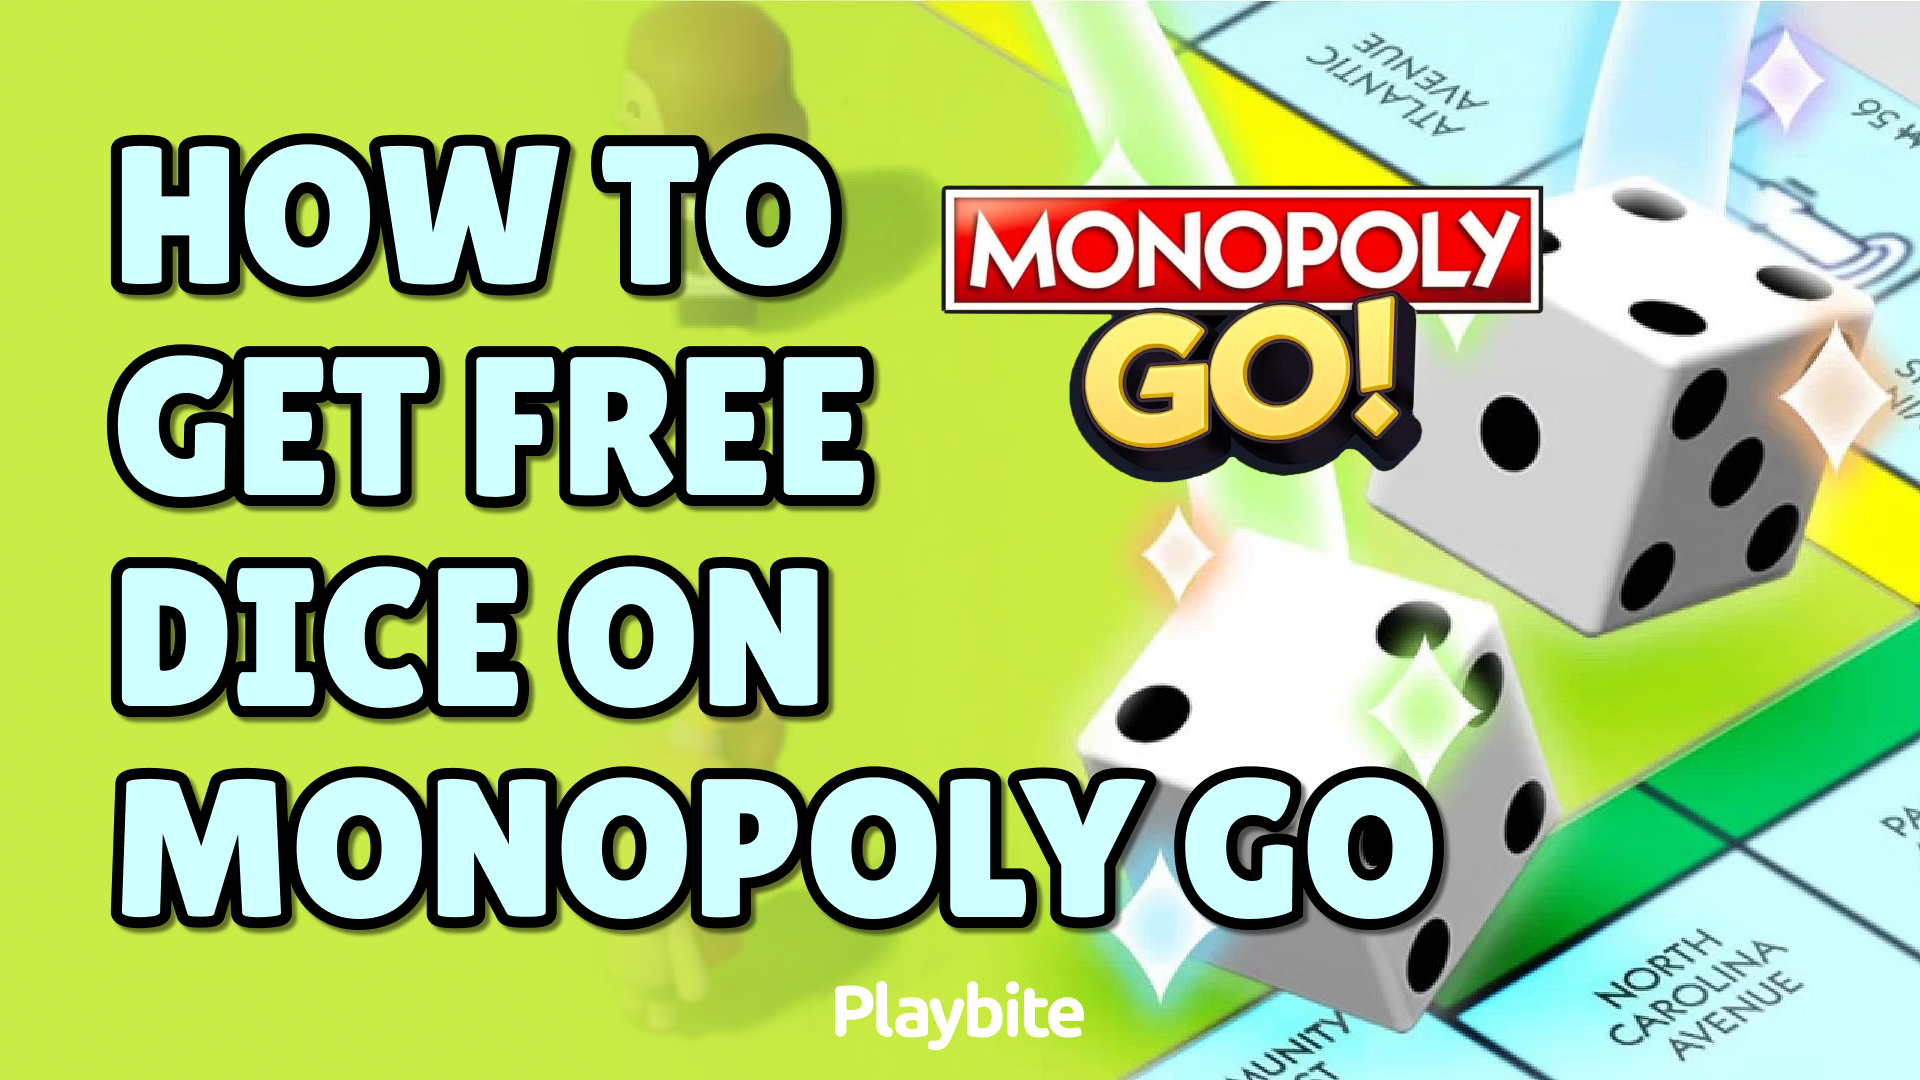 How To Get 2000 Robux For Free - Playbite